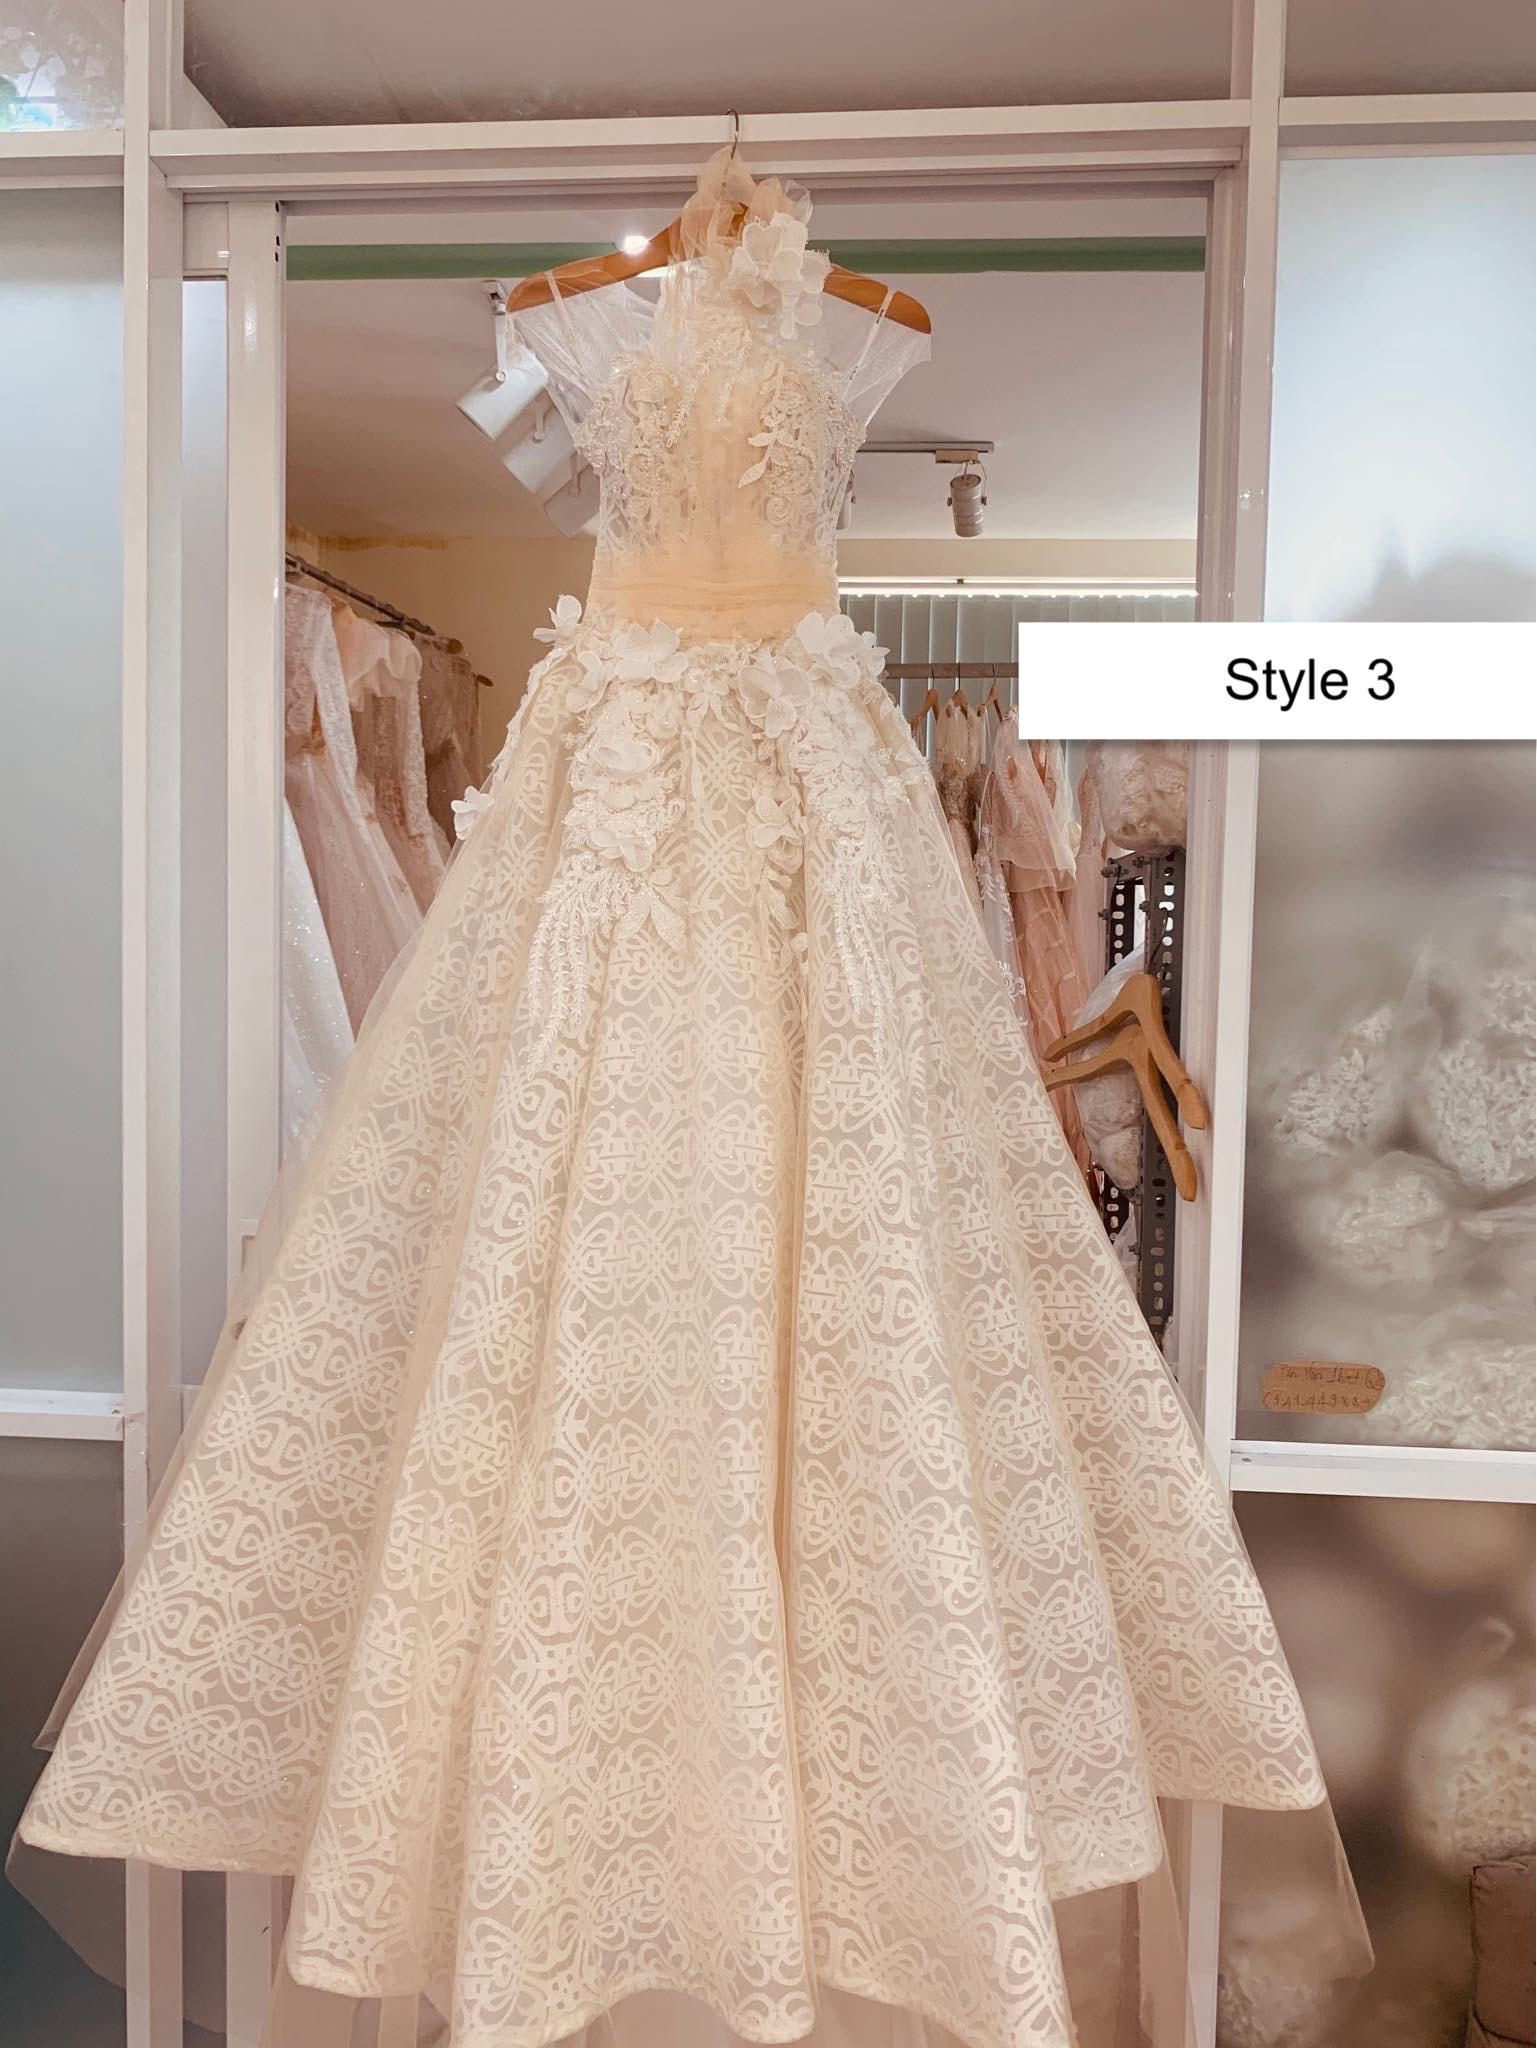 Nude cream/beige/champagne lace outdoor ball gown wedding dress ...